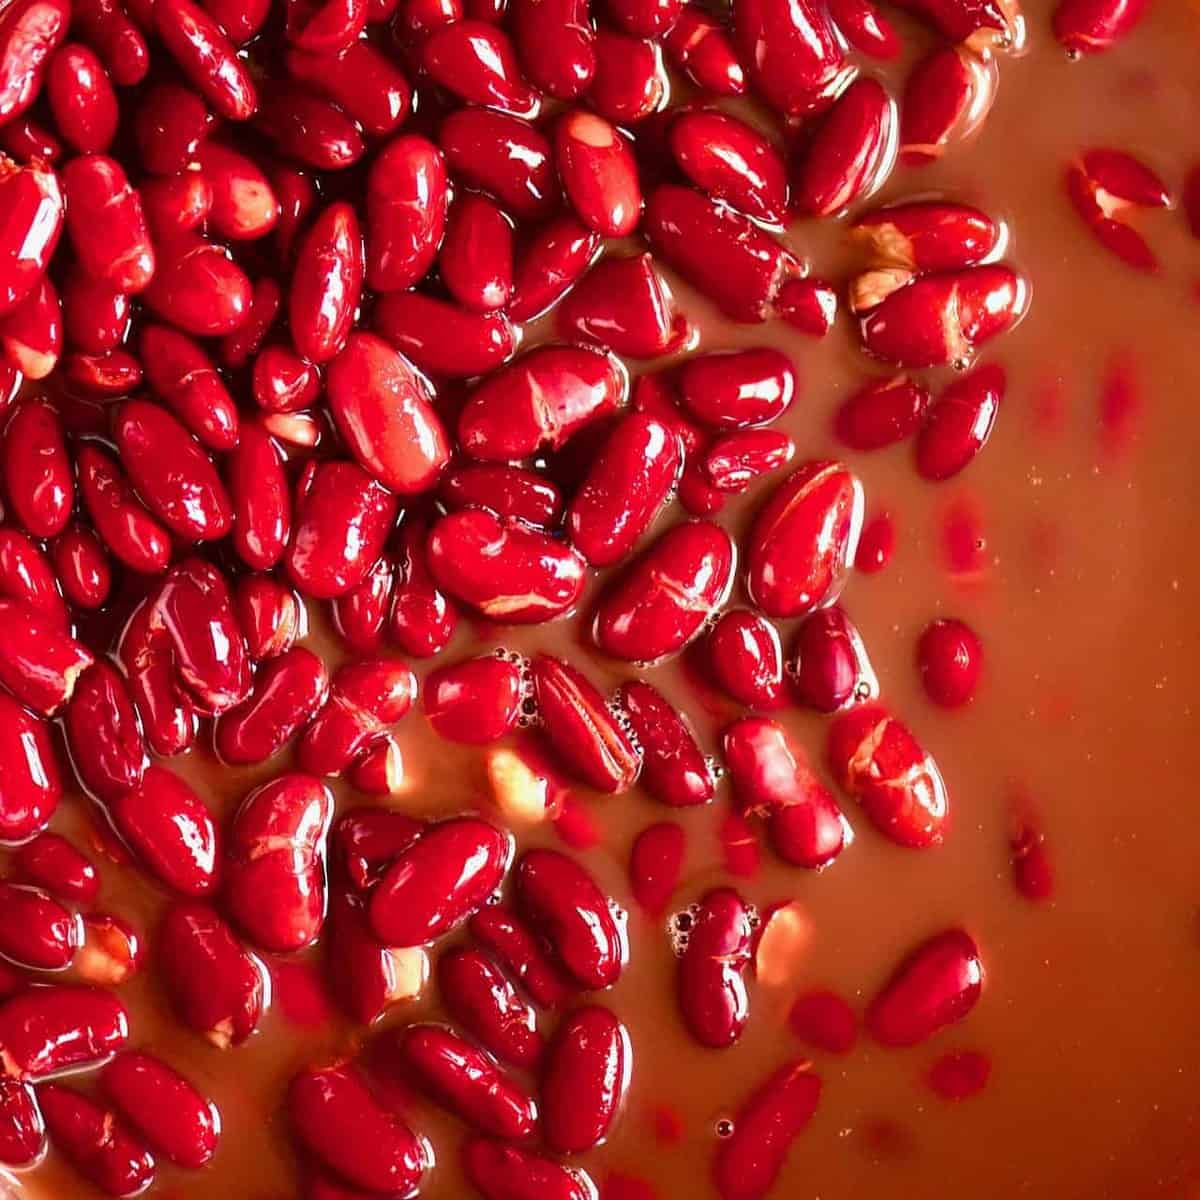 Square photo red kidney beans